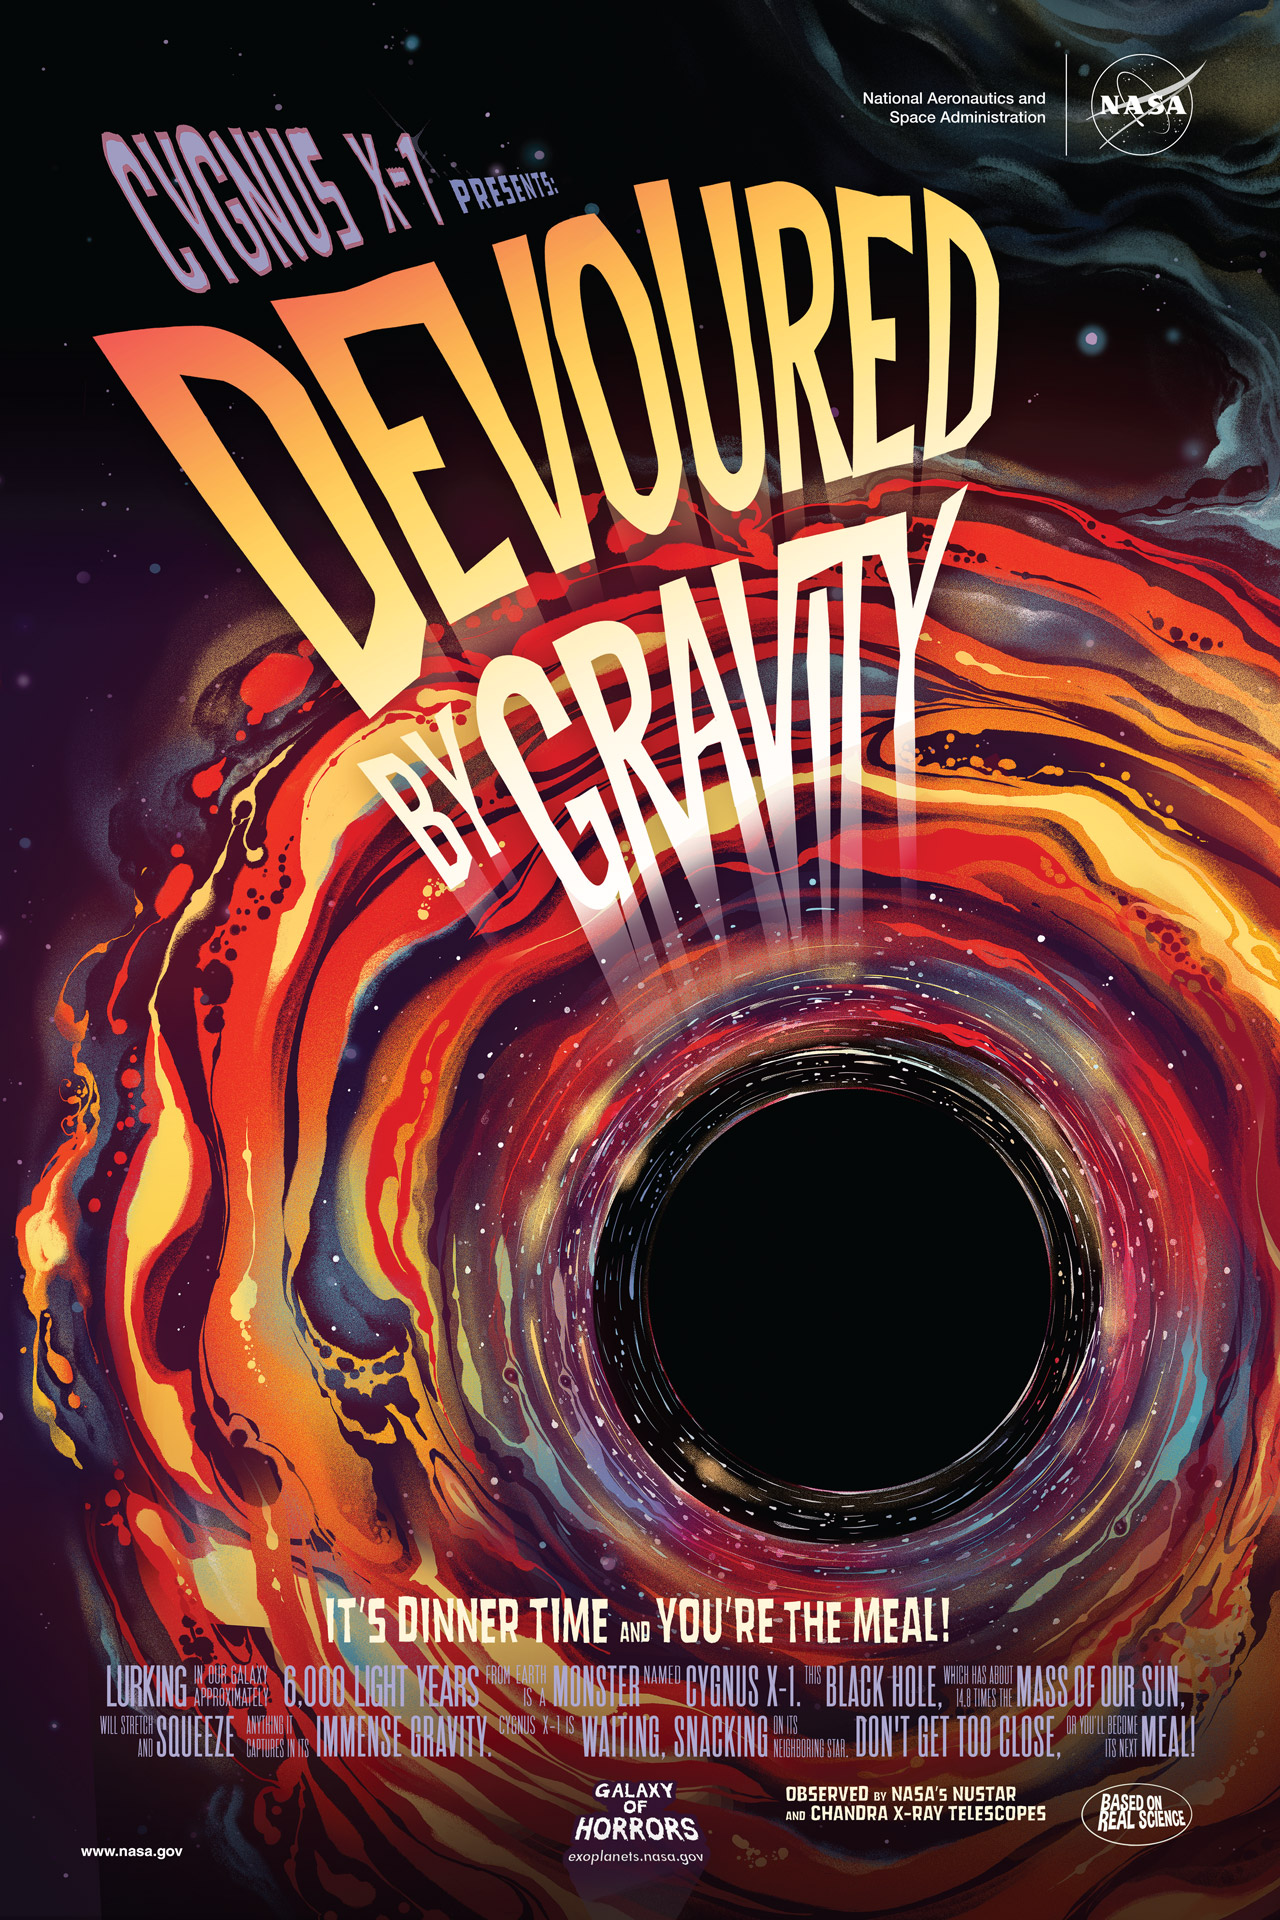 Devoured by Gravity – "Galaxy of Horrors" poster (English)